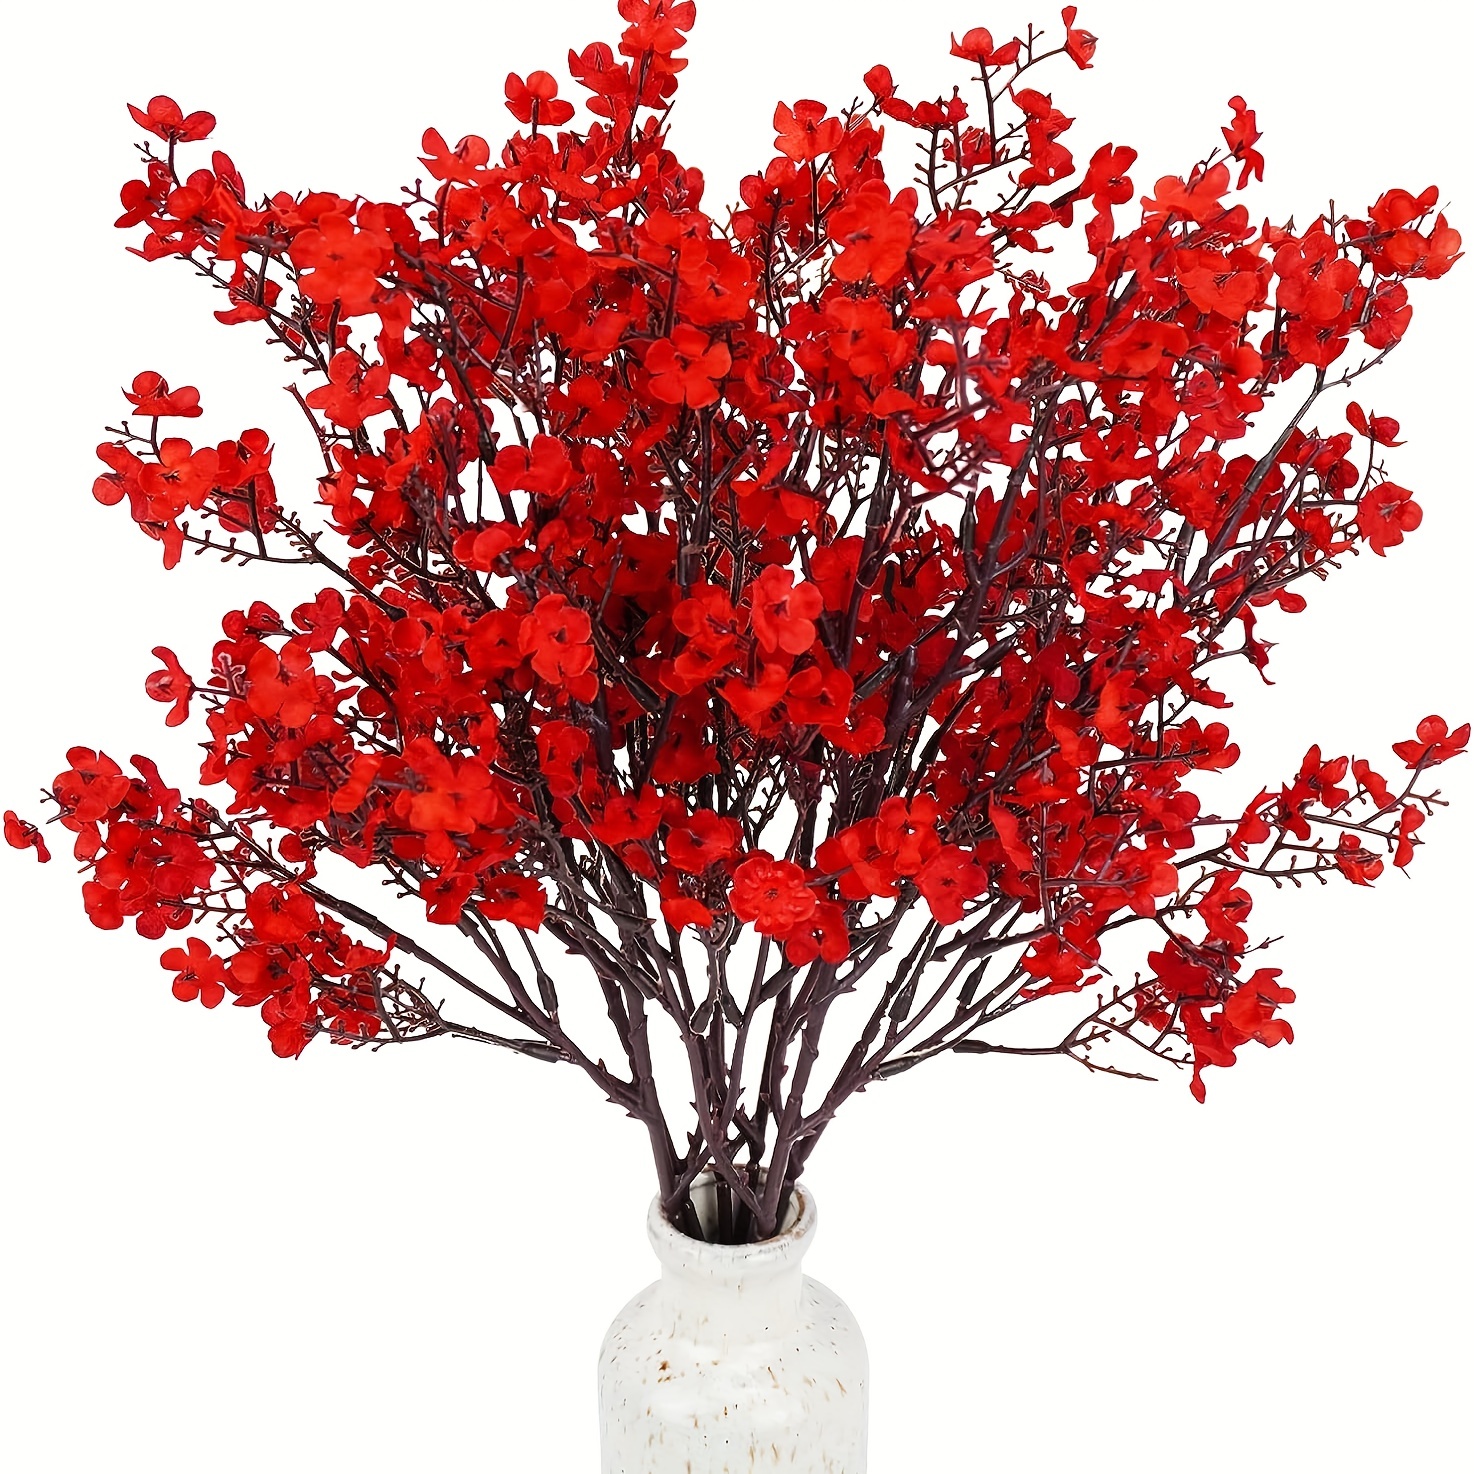  N&T NIETING Baby Breath Flowers,10pcs Fake Gypsophila Plants  Babys Breath Artificial Flowers for Wedding Party Home Garden Decoration,  Red : Health & Household